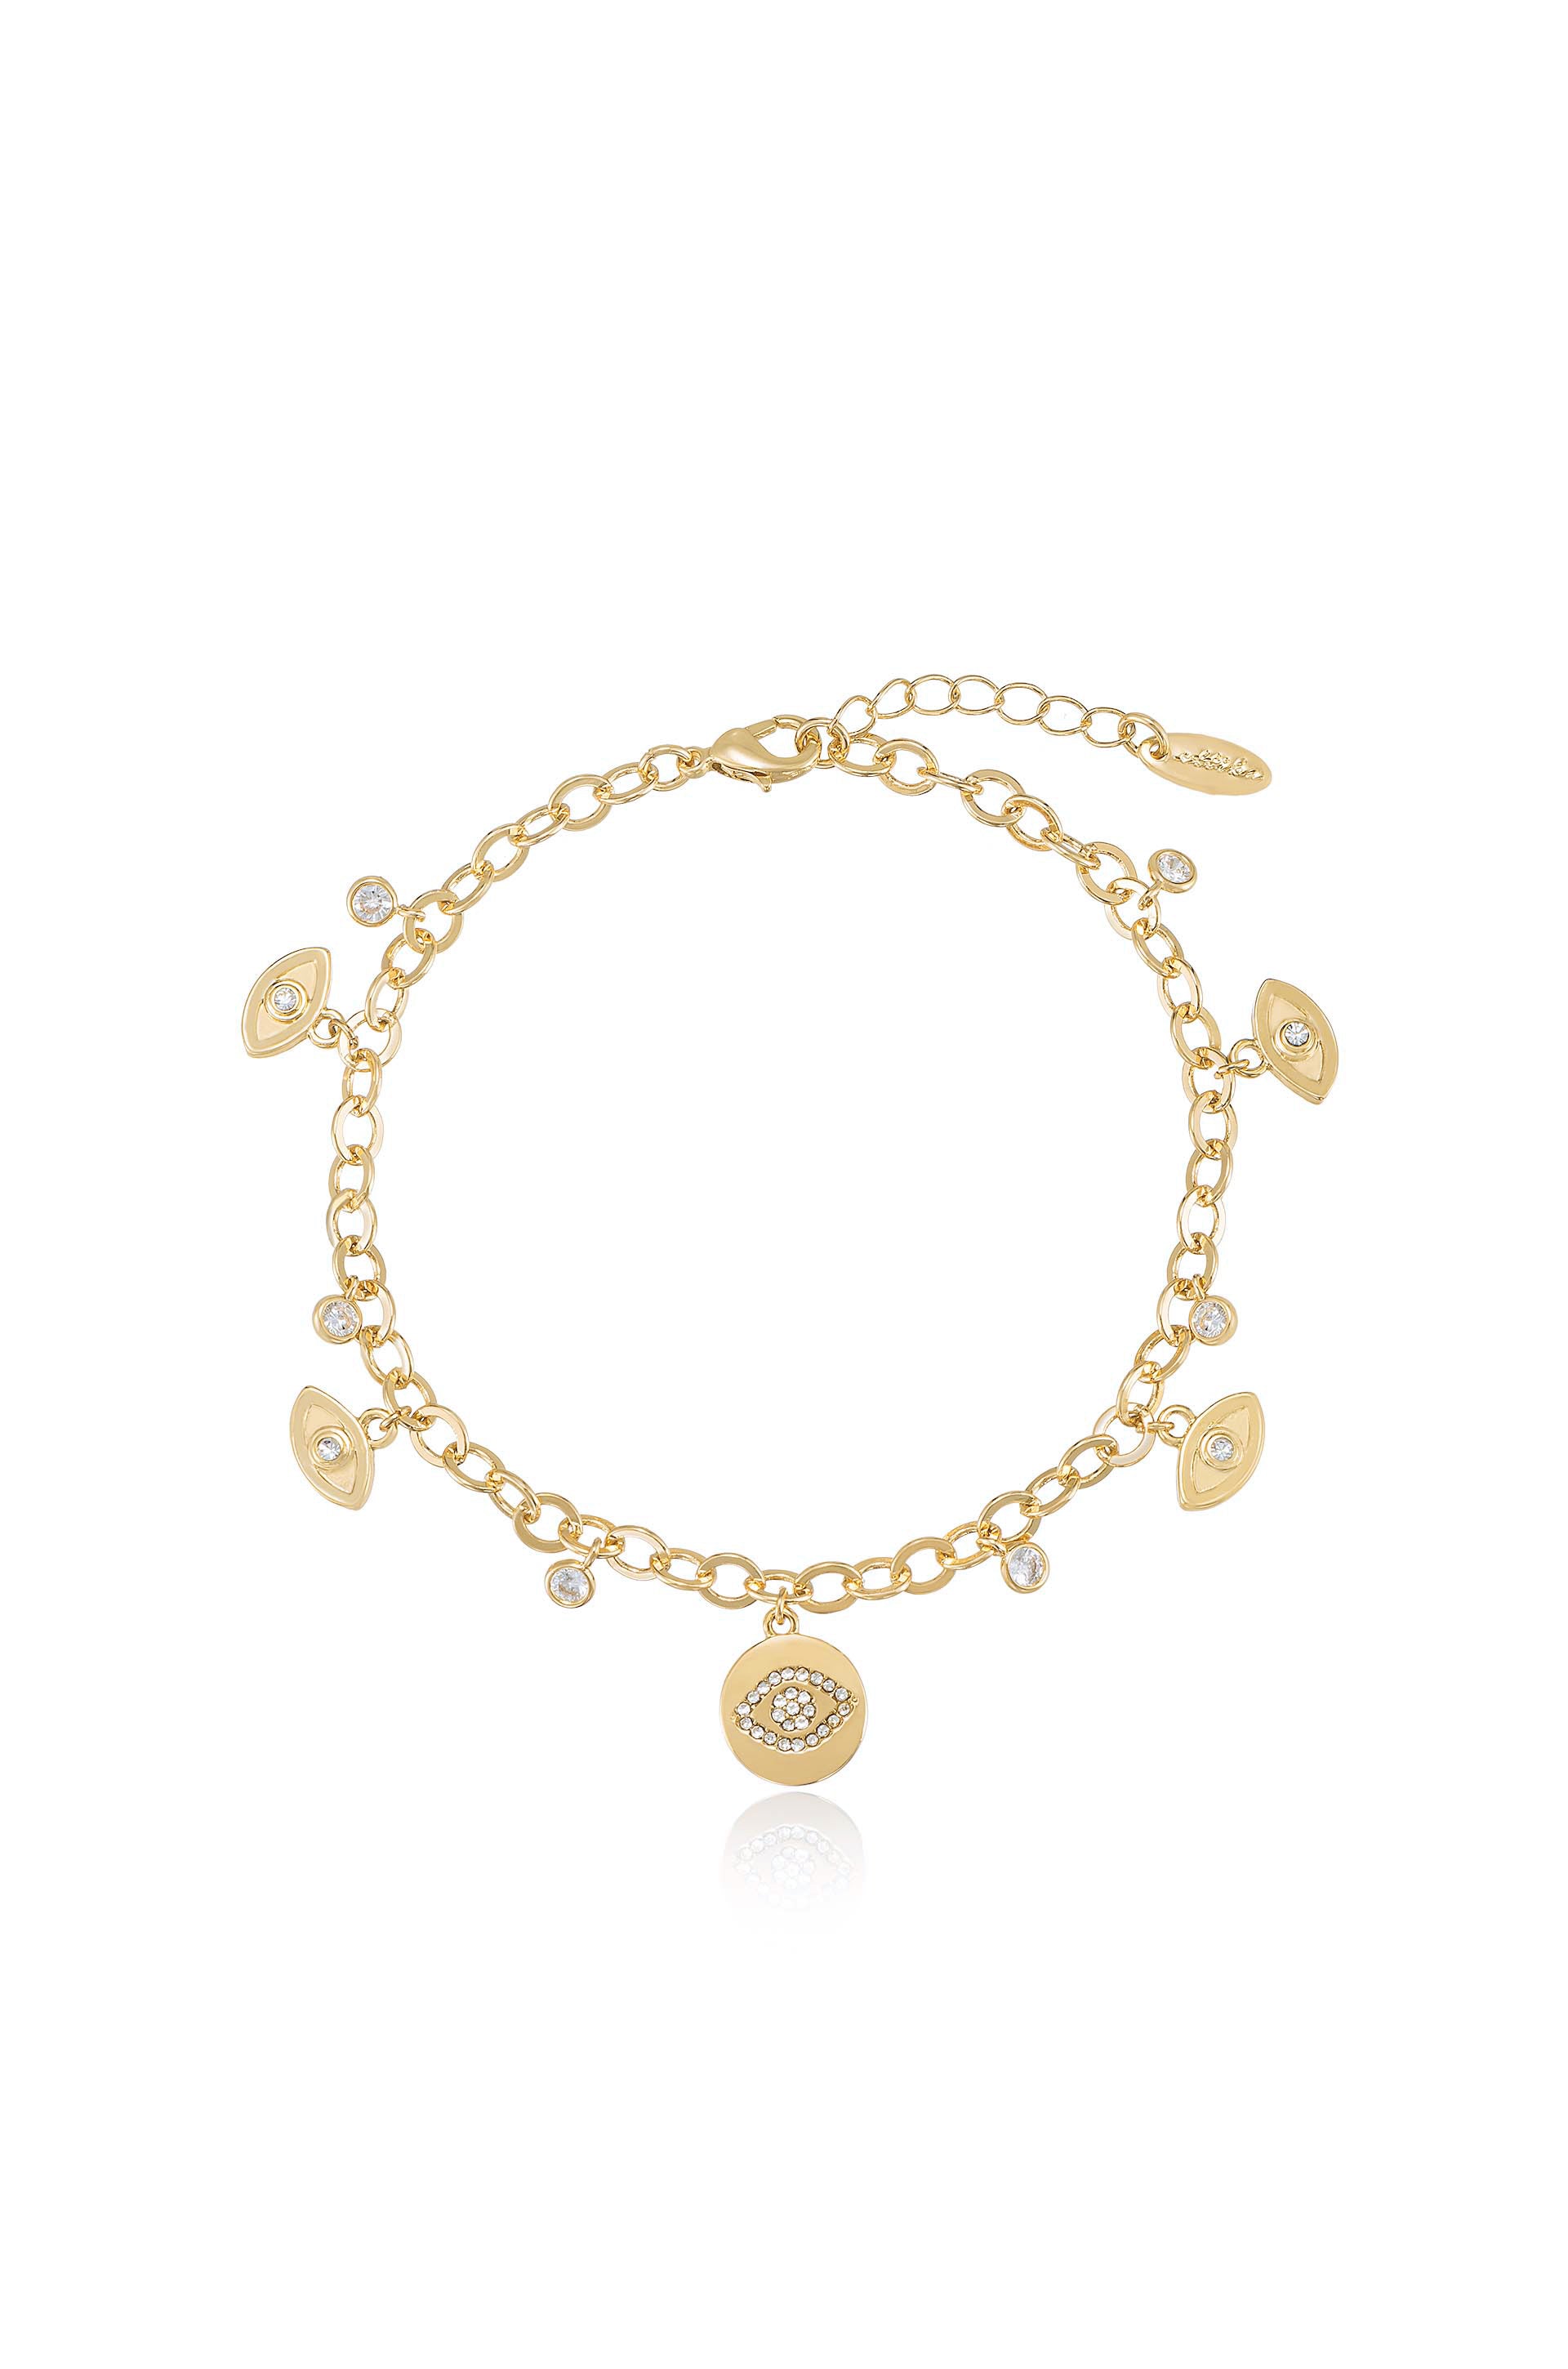 Third Eye Crystal Charm 18k Gold Plated Anklet